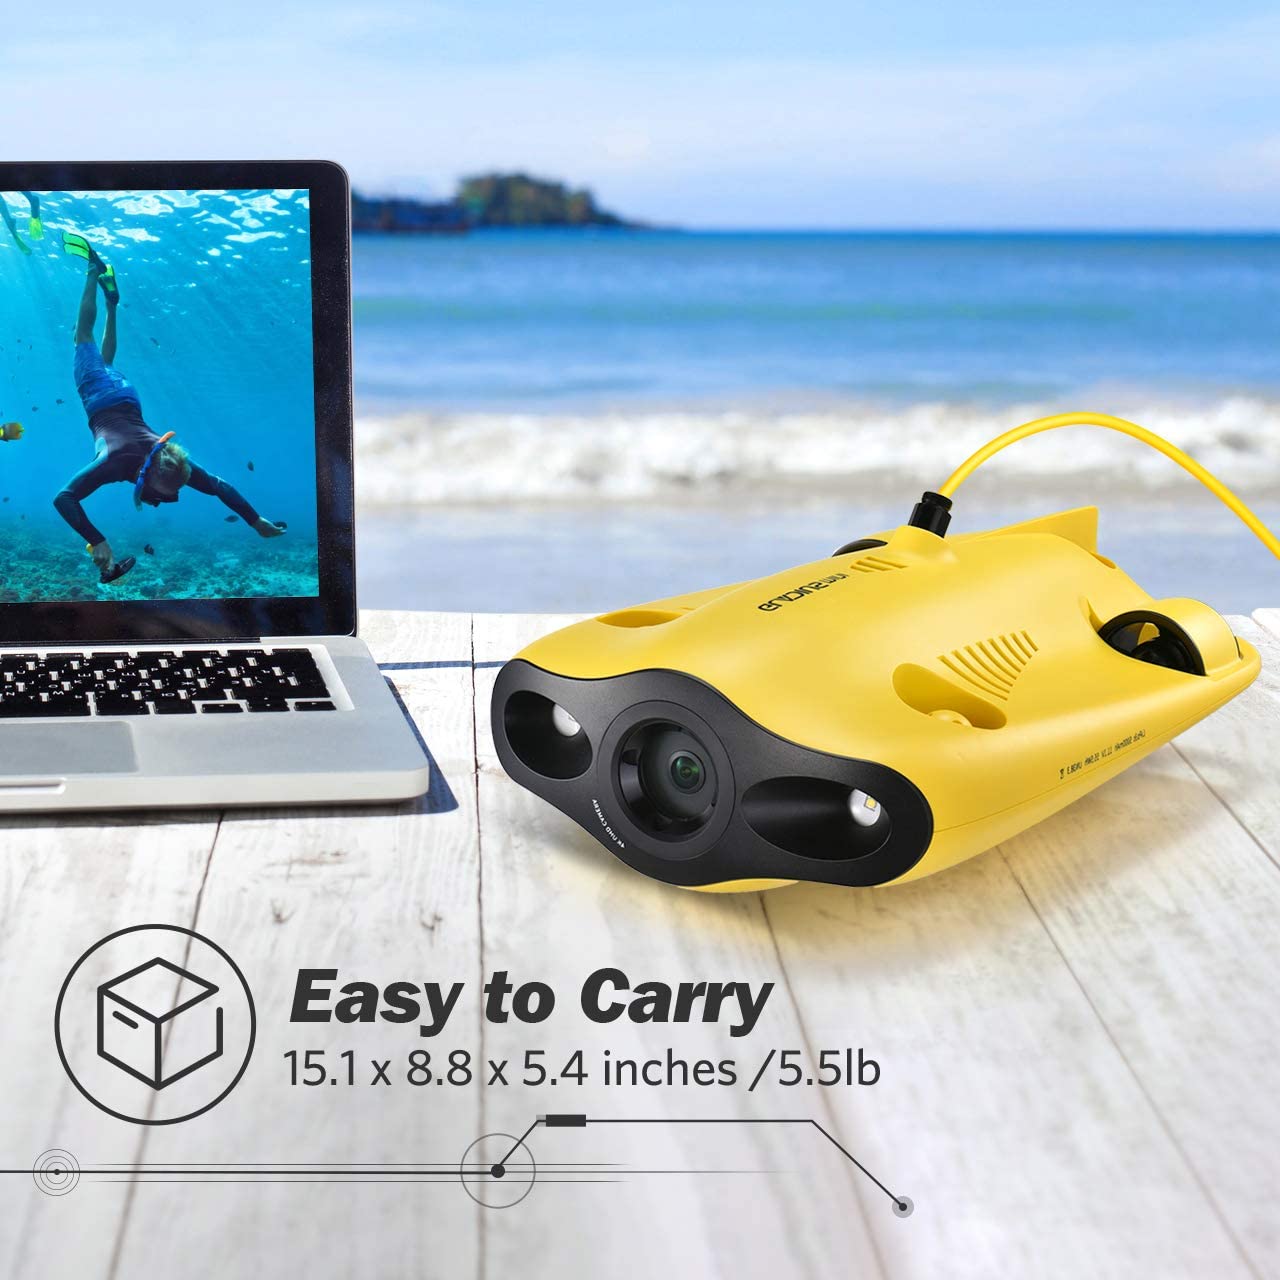 CHASING Gladius Mini Underwater Drone With 4K HD Camera 2 Hours Working Time One Key Depth Hold Live Stream Diving Rescue RC Drone - Photo: 6